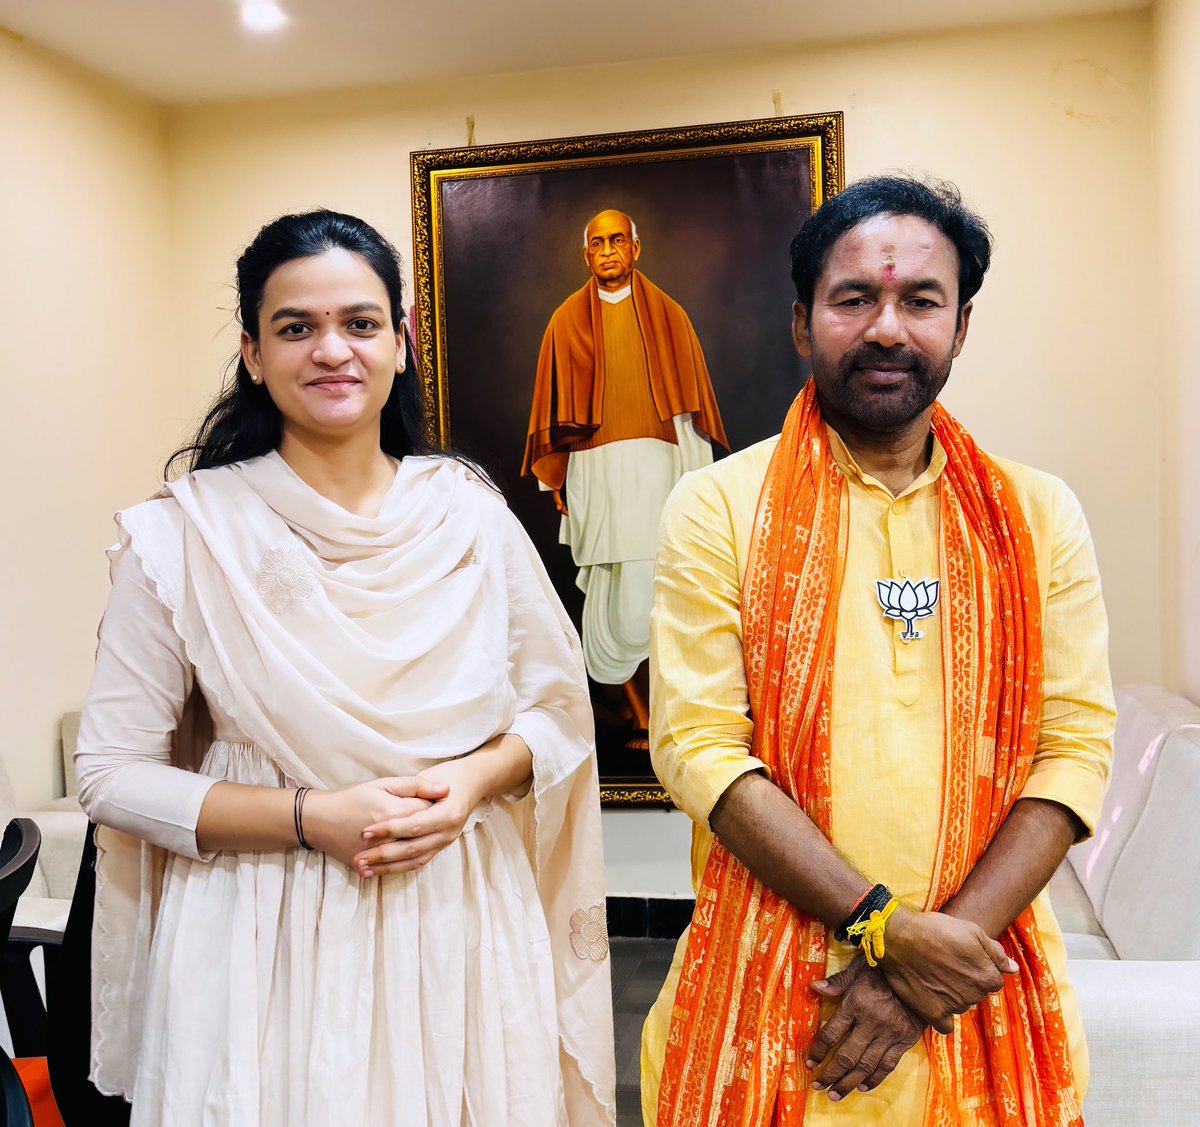 Cordially met Shri @kishanreddybjp Garu and thanked him for appointing me as the Vice President of BJYM, Telangana and was beyond joyed to learn that Secunderabad is going to paint itself in saffron once again! #BJP4Telangana #BJYM #PhirEkBaarModiSarkaar